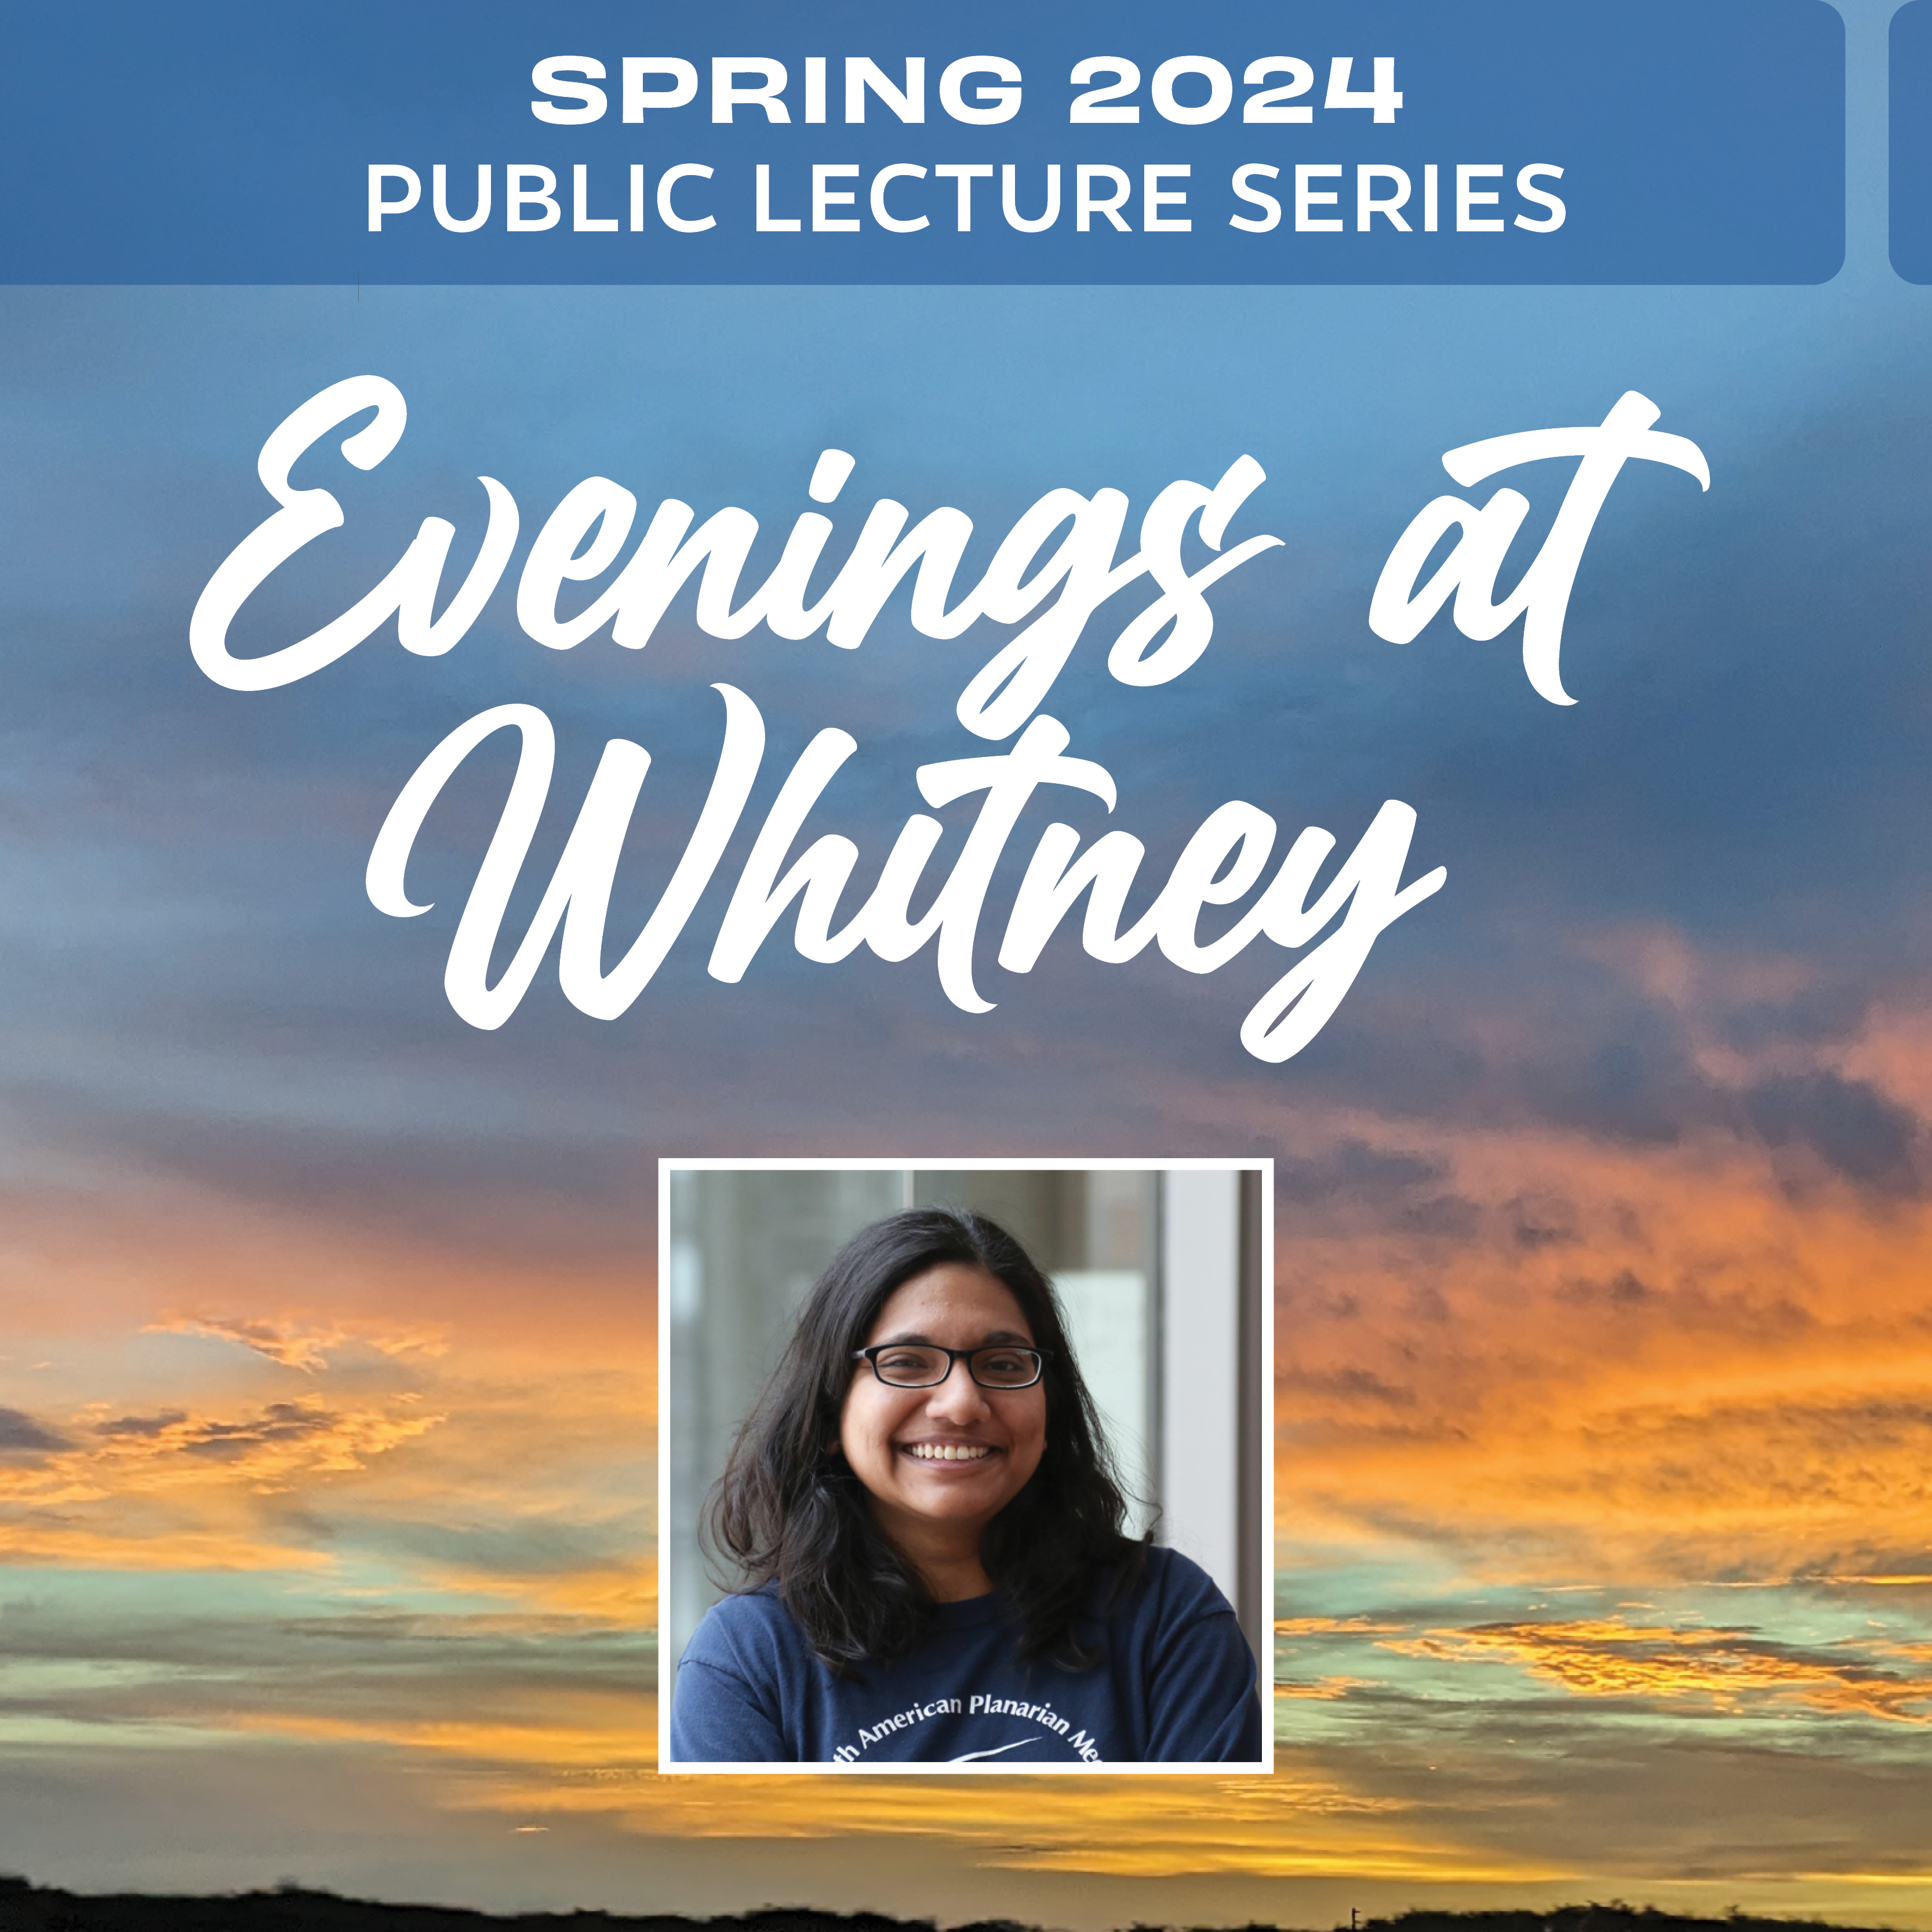 Evenings at Whitney February 8